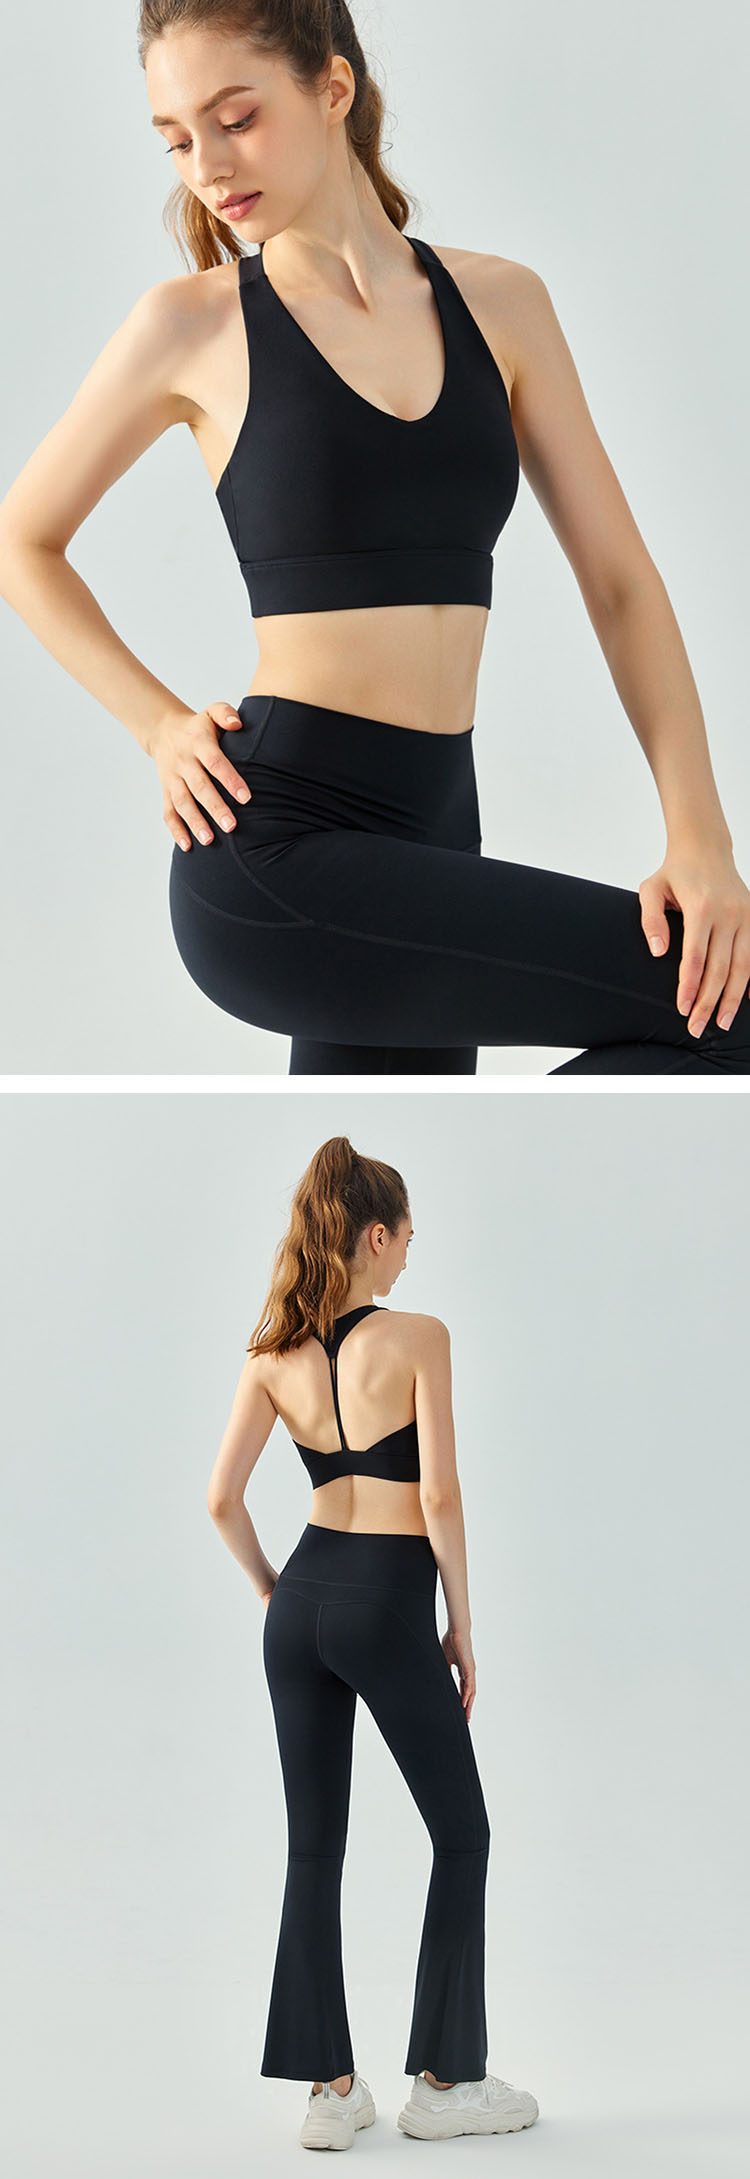 Try them out today and experience the ultimate comfort in workout wear